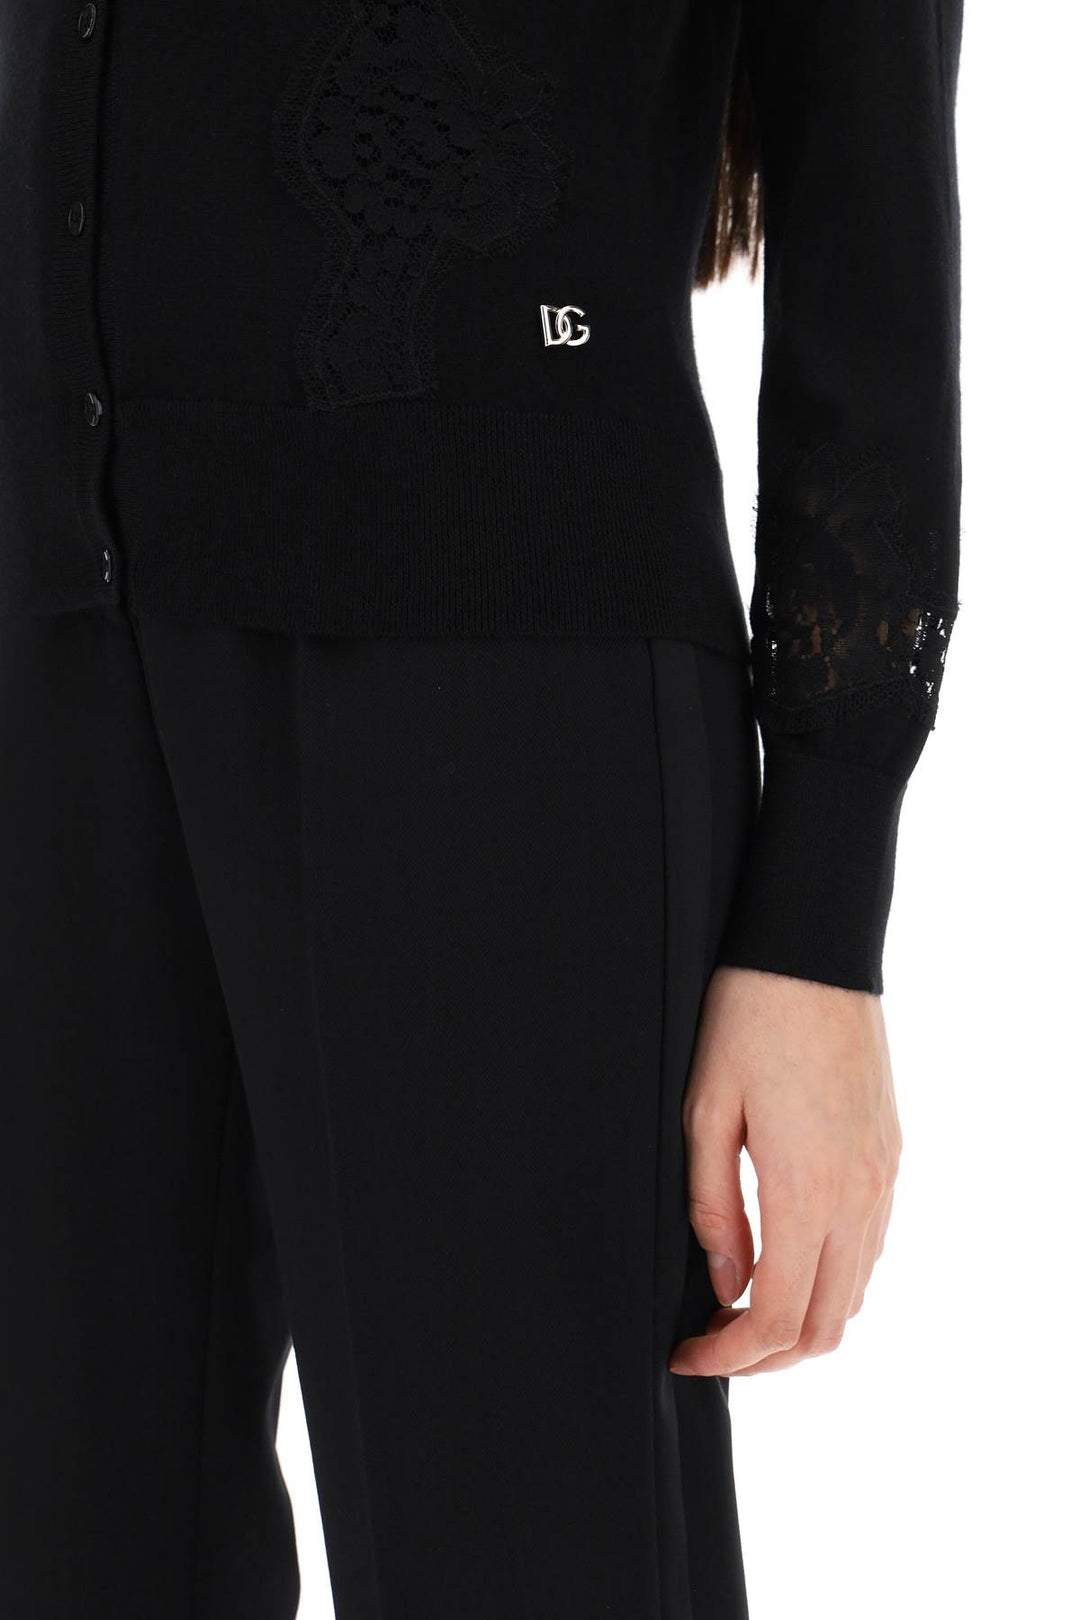 Dolce & gabbana lace-insert cardigan with eight-3